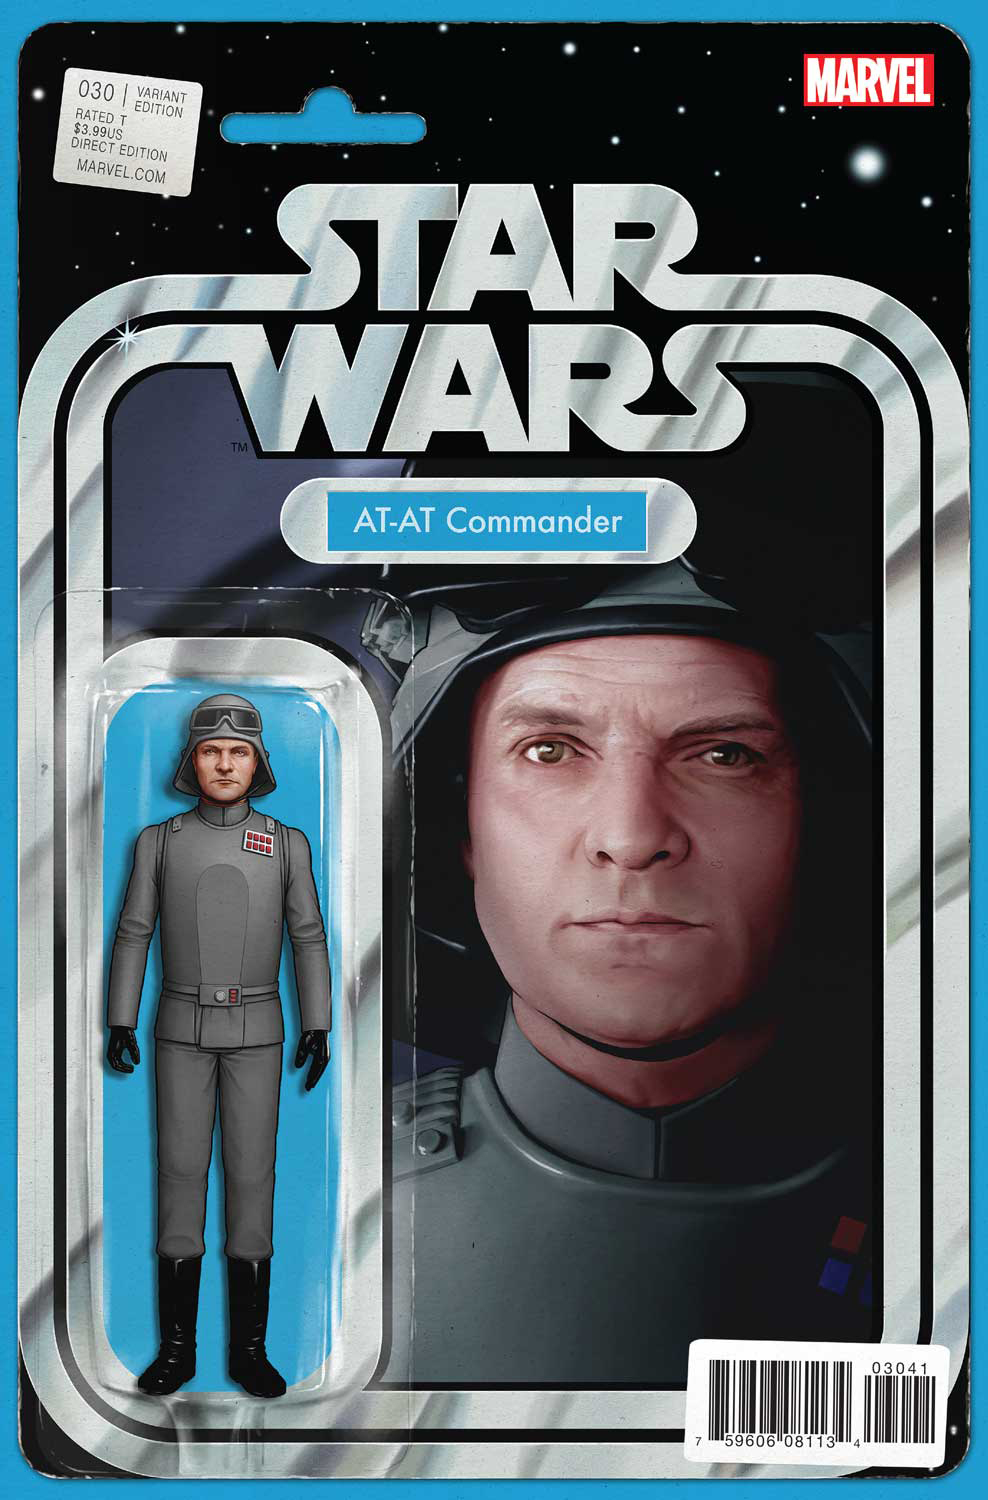 Star Wars #30 (Action Figure Variant Cover) (05.04.2017)